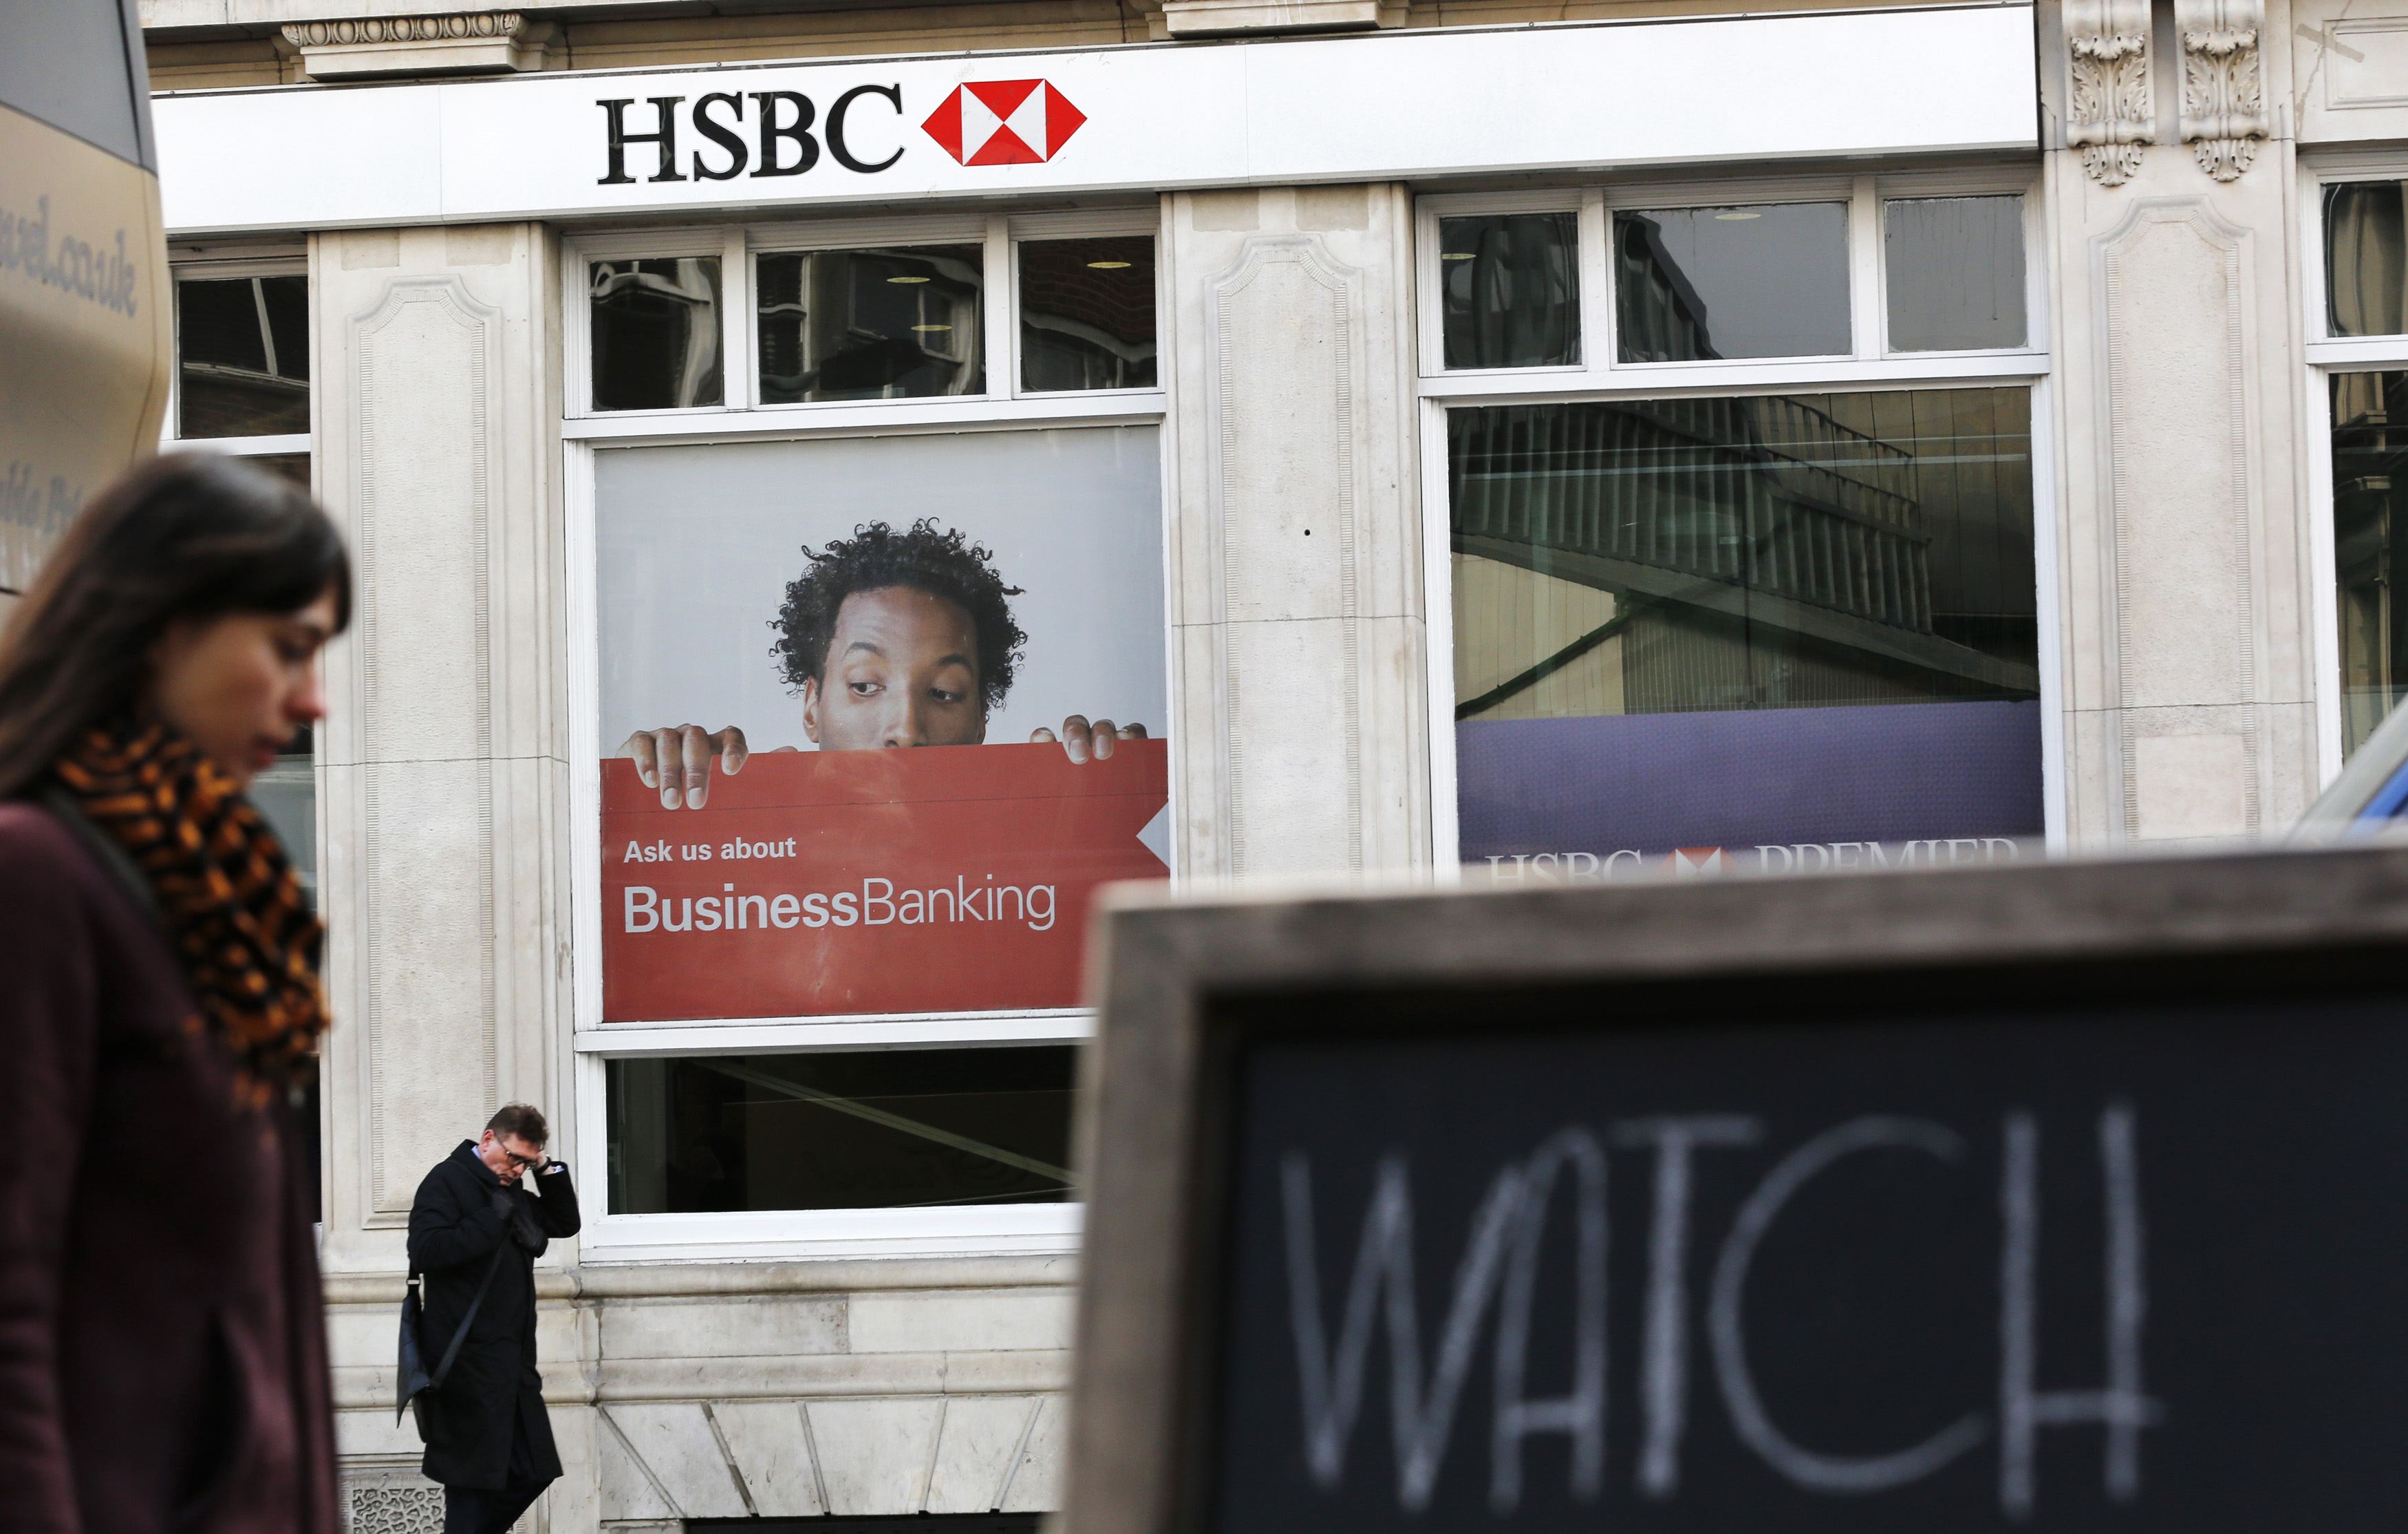 HSBC publishes apology in British papers over tax evasion claims